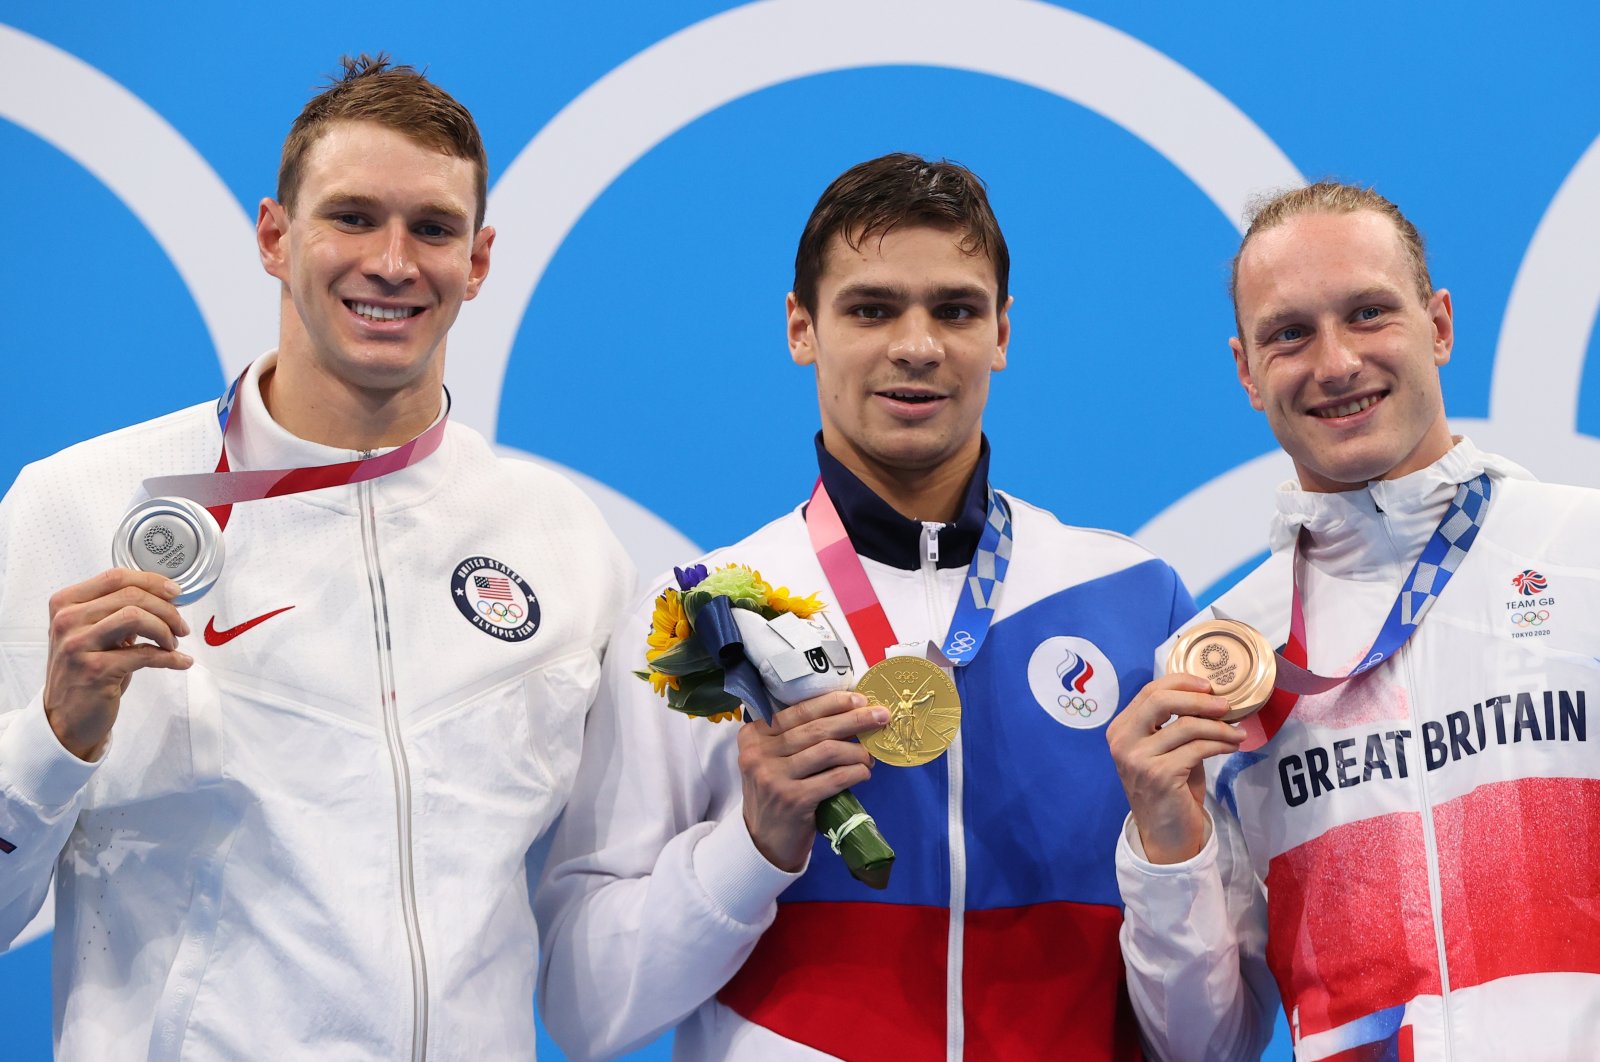 Evgeny Rylov of the Russian Olympic Committee (C), Ryan Murphy of the U.S. (L) and Luke Greenbank of Britain pose on the podium with the gold, silver and bronze medals respectively at Tokyo Aquatics Centre, in Tokyo, Japan, July 30, 2021. (Reuters Photo)